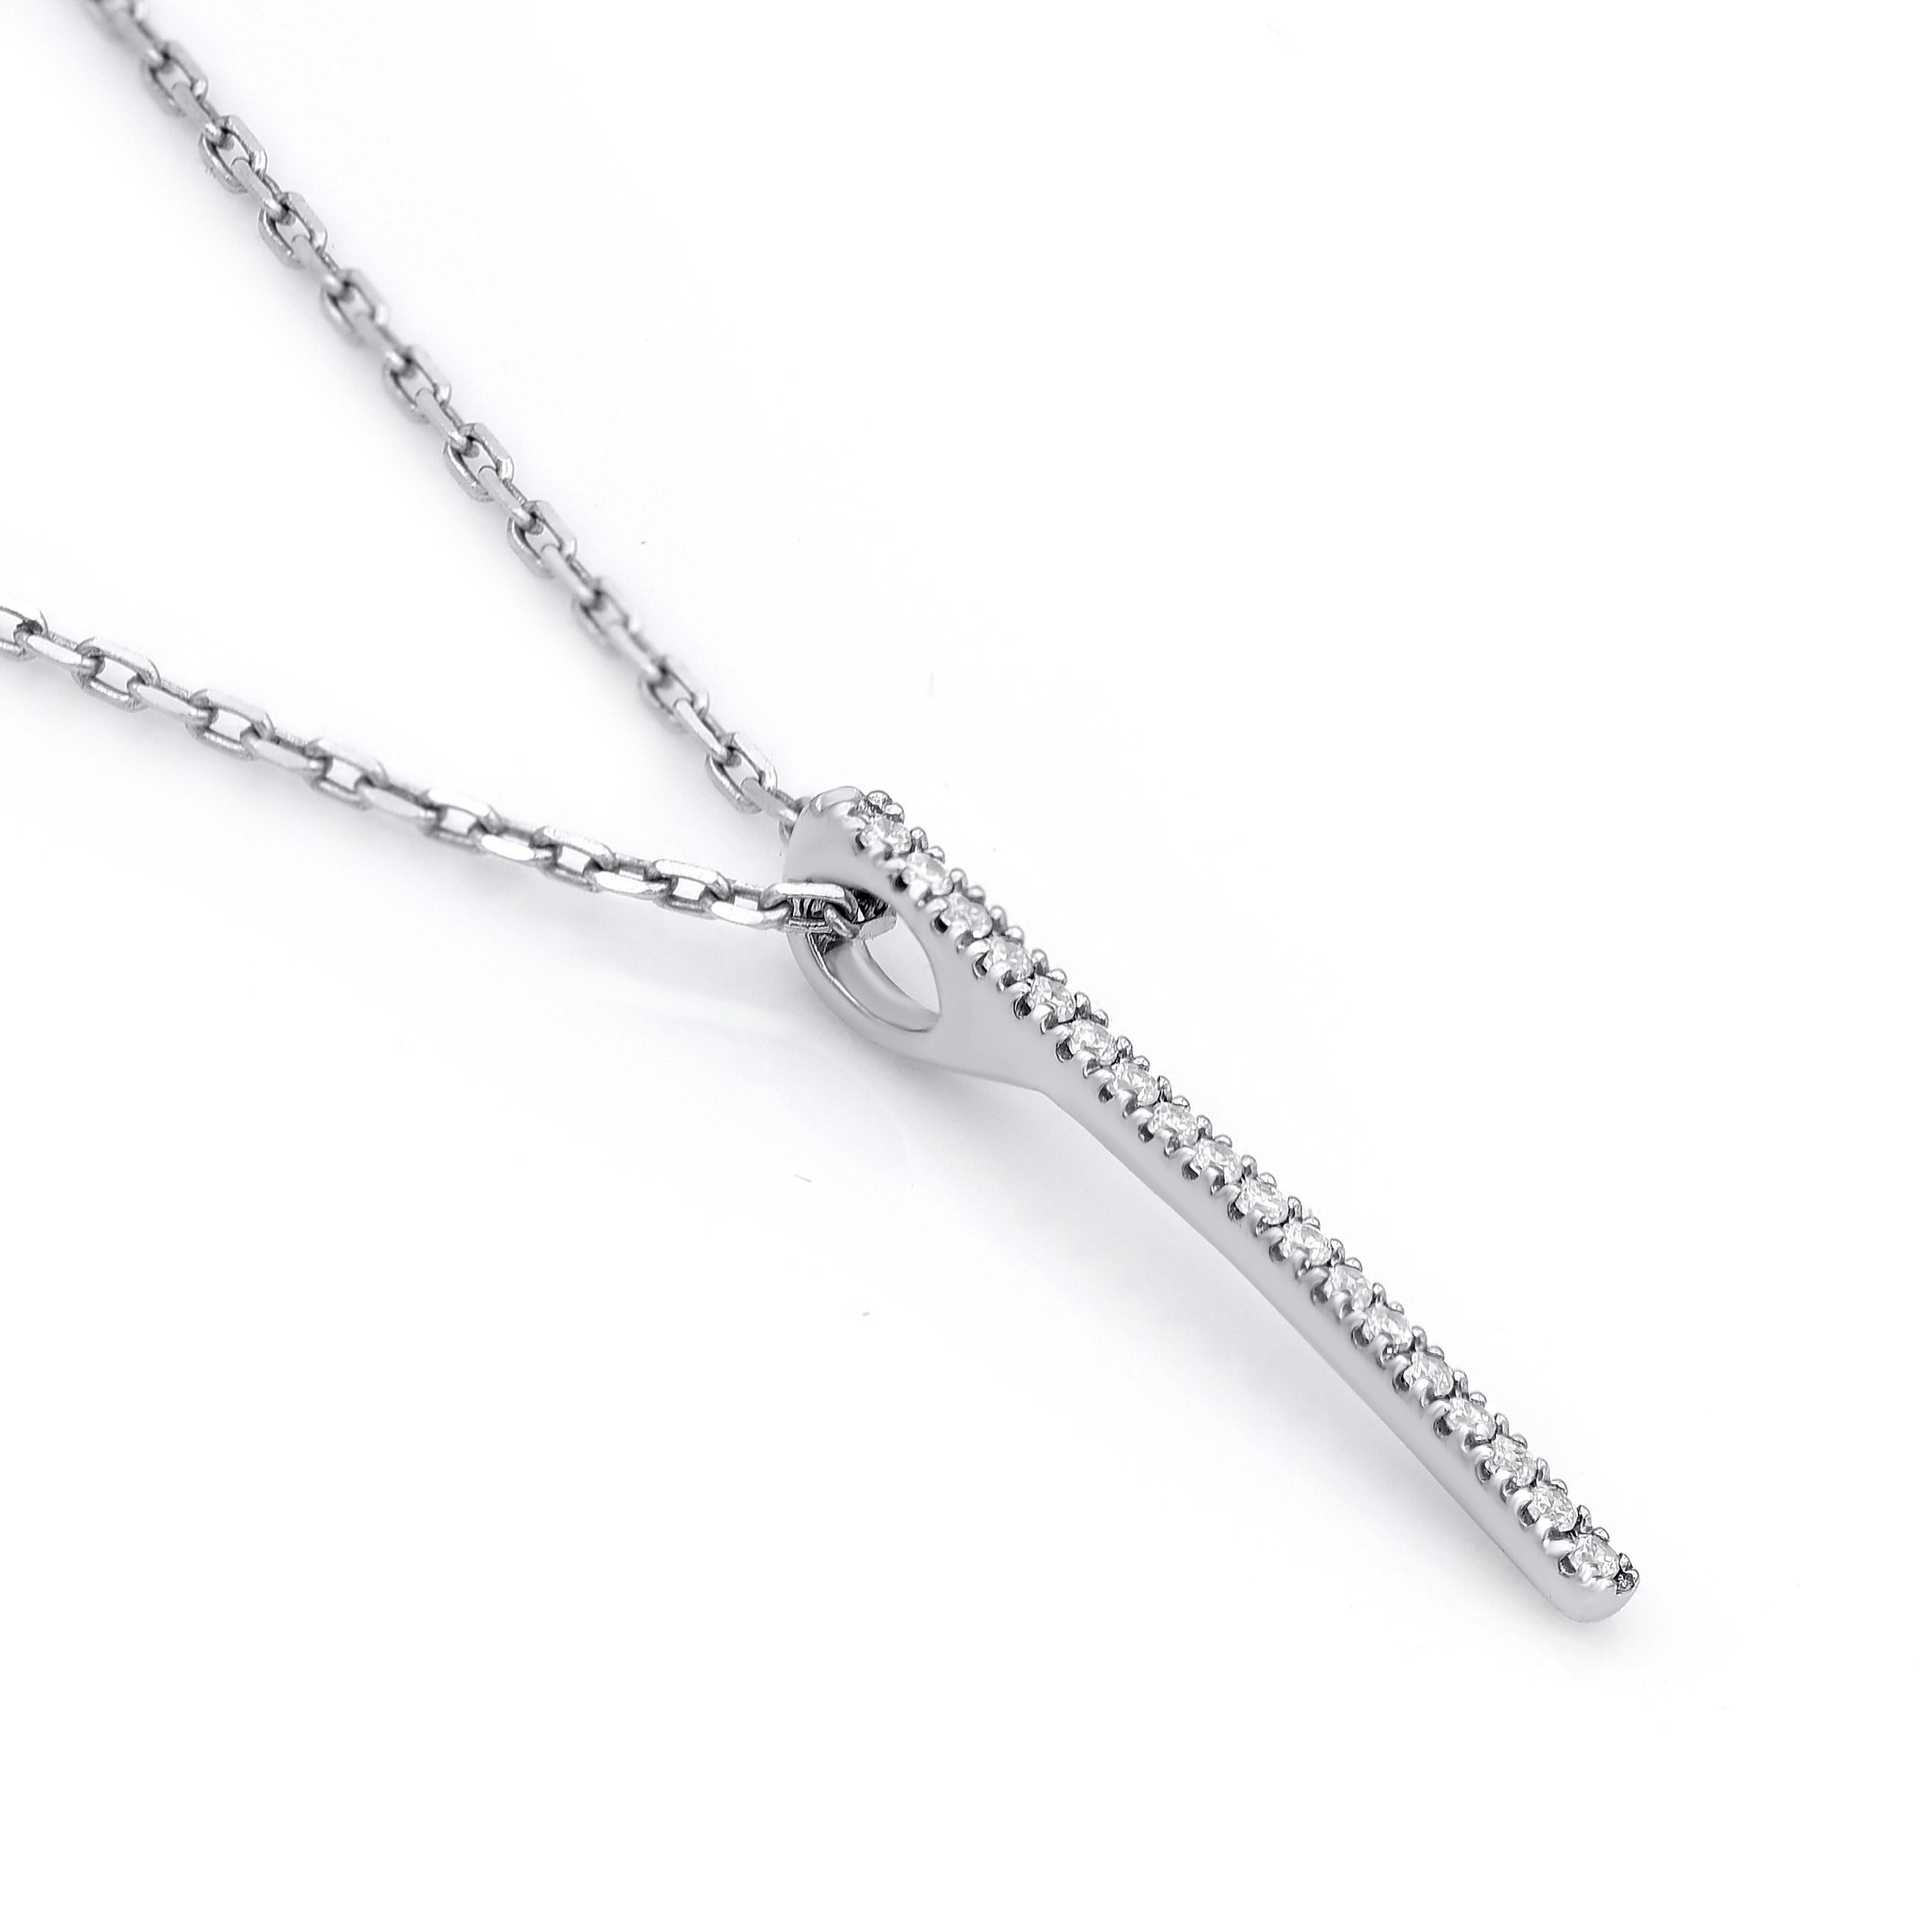 Make any day special with this gorgeous diamond pendant. This pendant is crafted from 14-karat white gold and features 18 single cut diamonds set in prong setting. H-I color I2 clarity and a high polish finish complete the brilliant sophistication